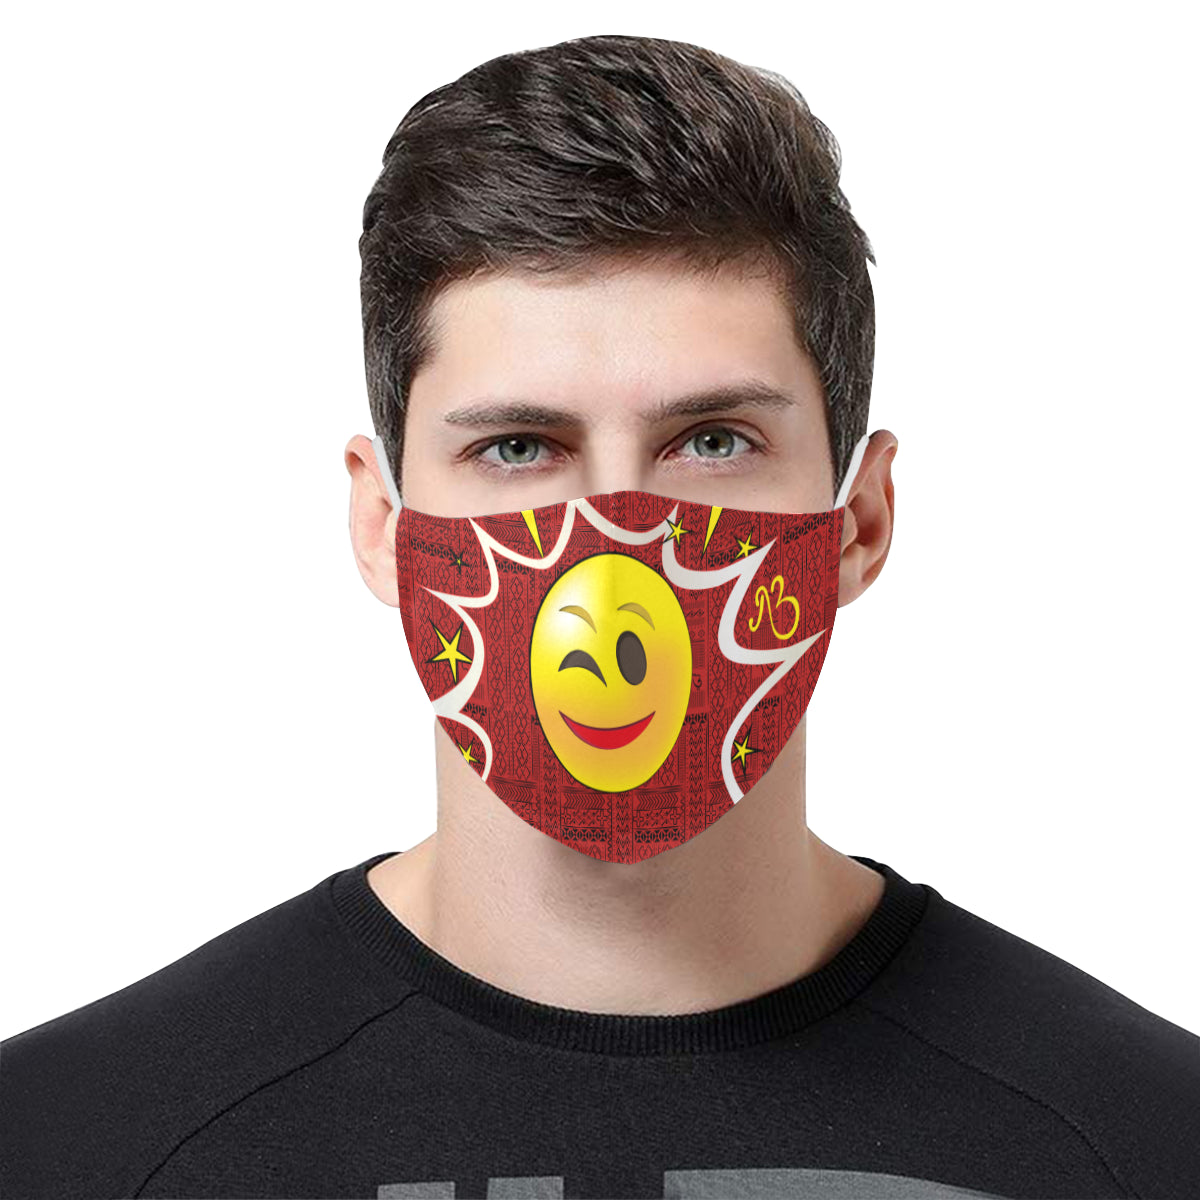 Wink Tribal Print Comic Emoji Cotton Fabric Face Mask with Filter Slot and Adjustable Strap - Non-medical use (2 Filters Included)